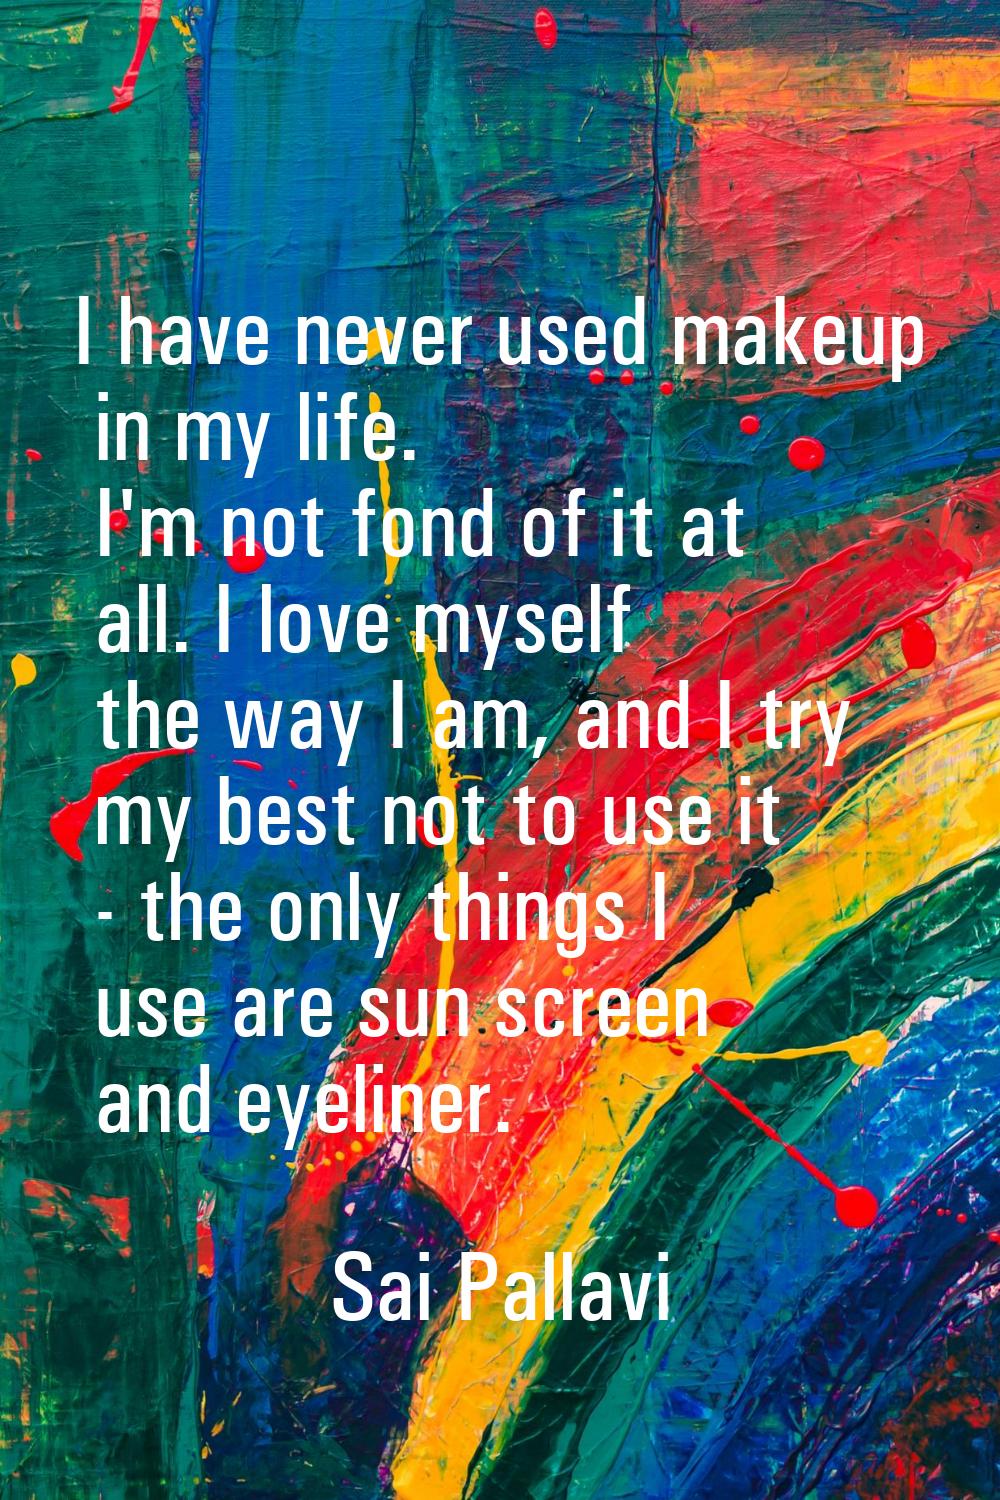 I have never used makeup in my life. I'm not fond of it at all. I love myself the way I am, and I t